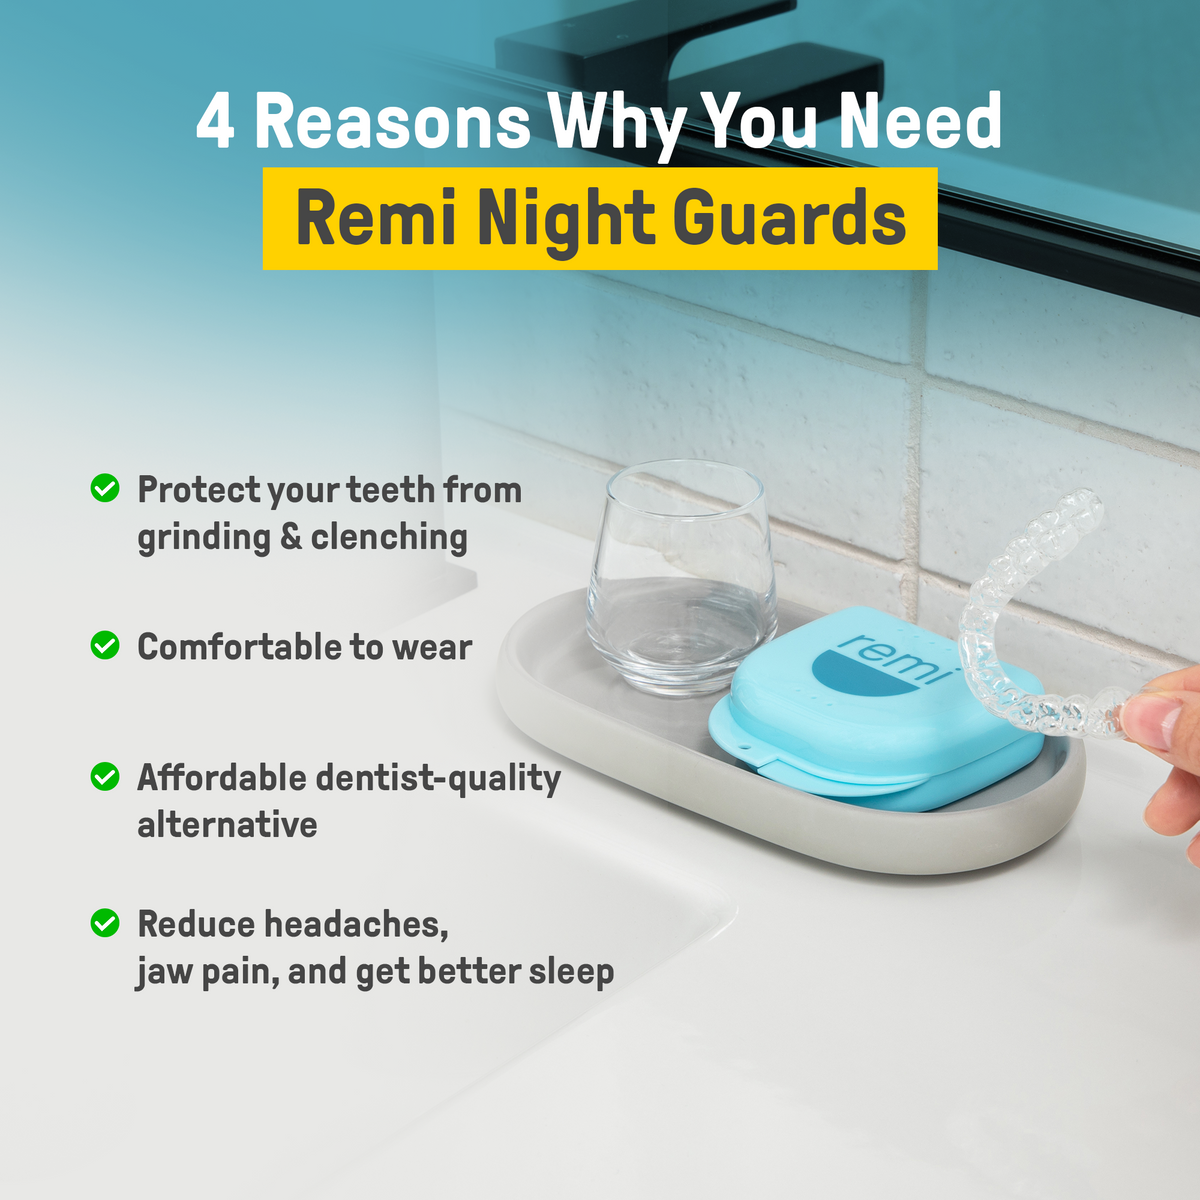 Promotional material highlighting the benefits of using Custom Night Guards for dental protection and improved sleep, featuring dental-grade quality materials designed to prevent teeth grinding.